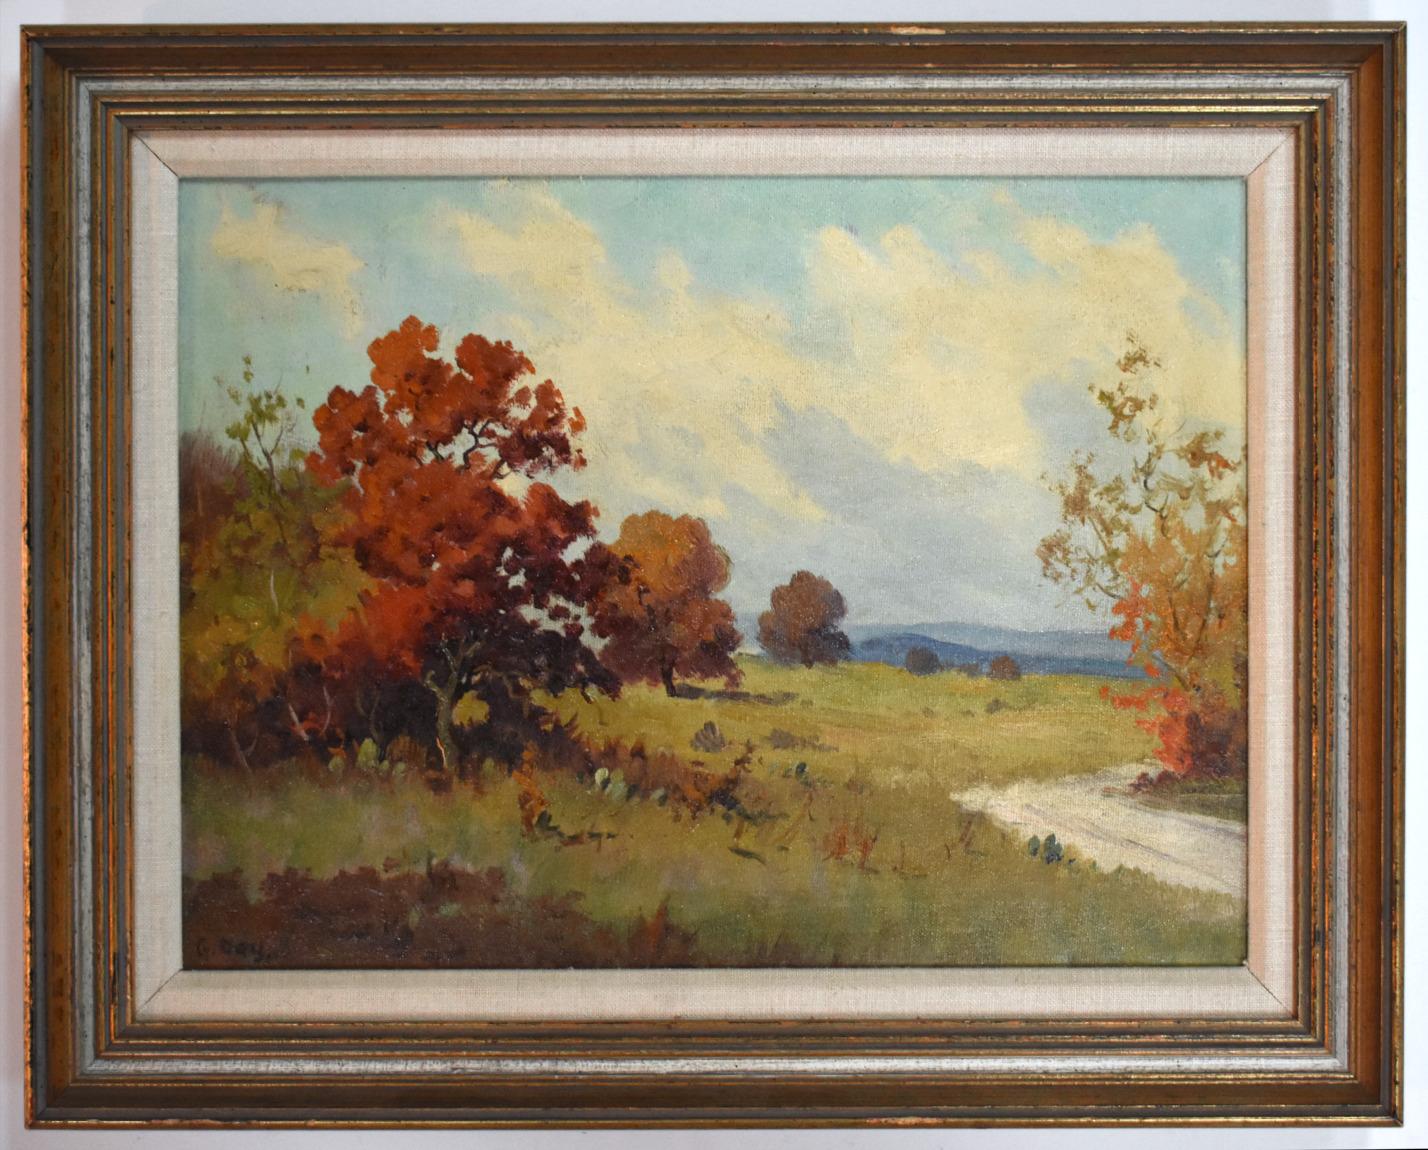 Wood, Robert W. Landscape Painting - "AUTUMN PATH" TEXAS HILL COUNTRY RARE G. DAY SIGNATURE